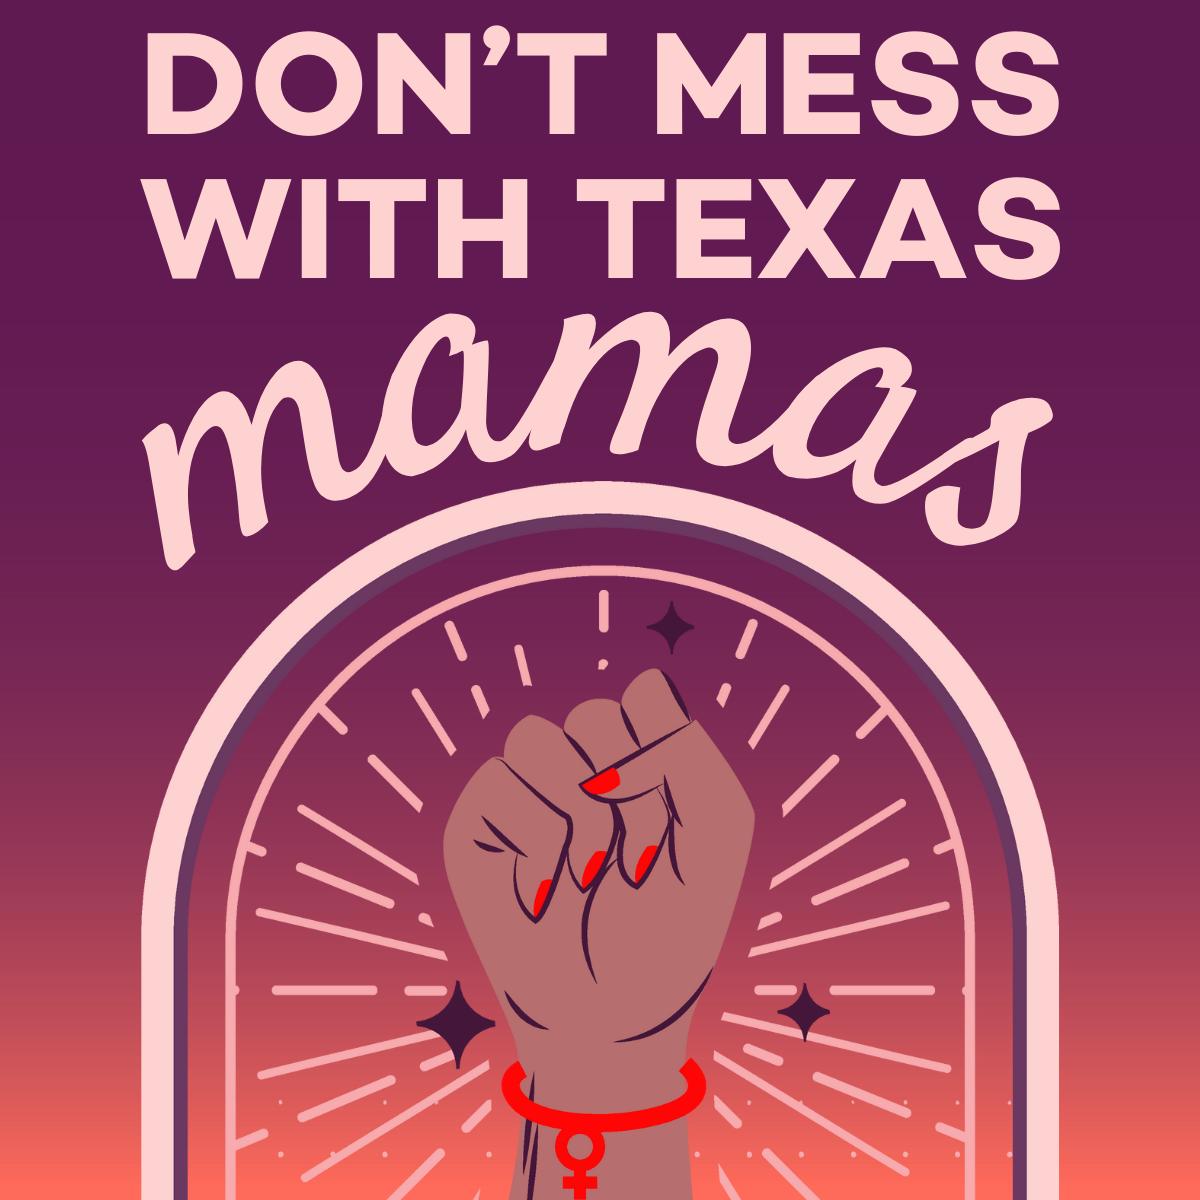 Happy #MothersDay to the all the amazing mothers across Texas! Your strength and resilience in the face of adversity shine through every day, and we couldn't be more grateful for all that you do 💟